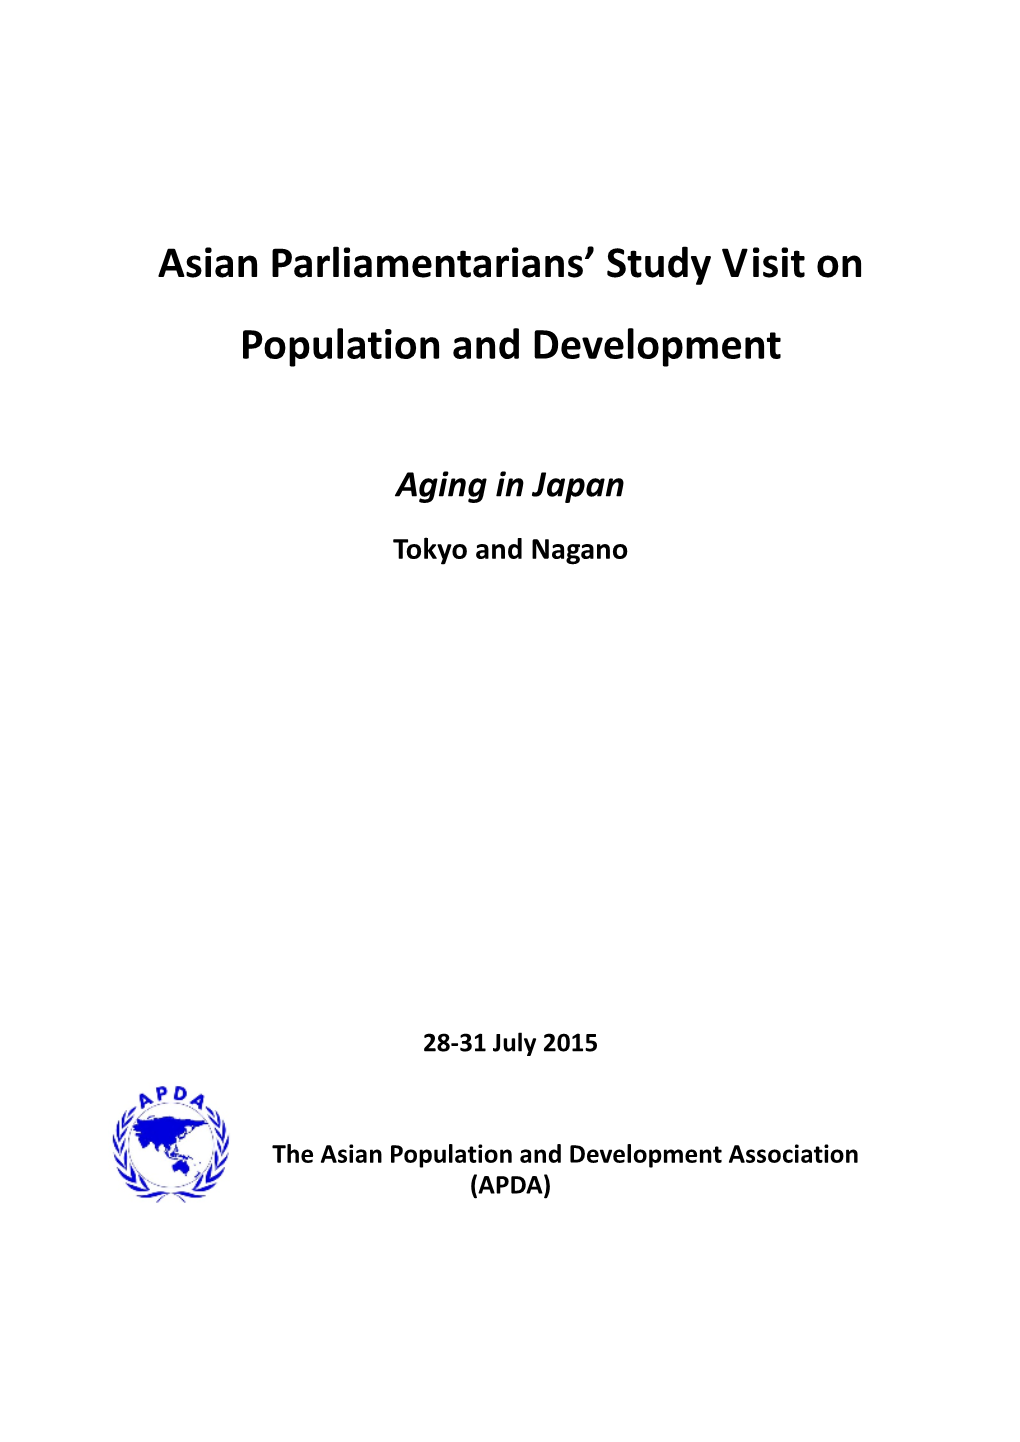 Asian Parliamentarians' Study Visit on Population and Development